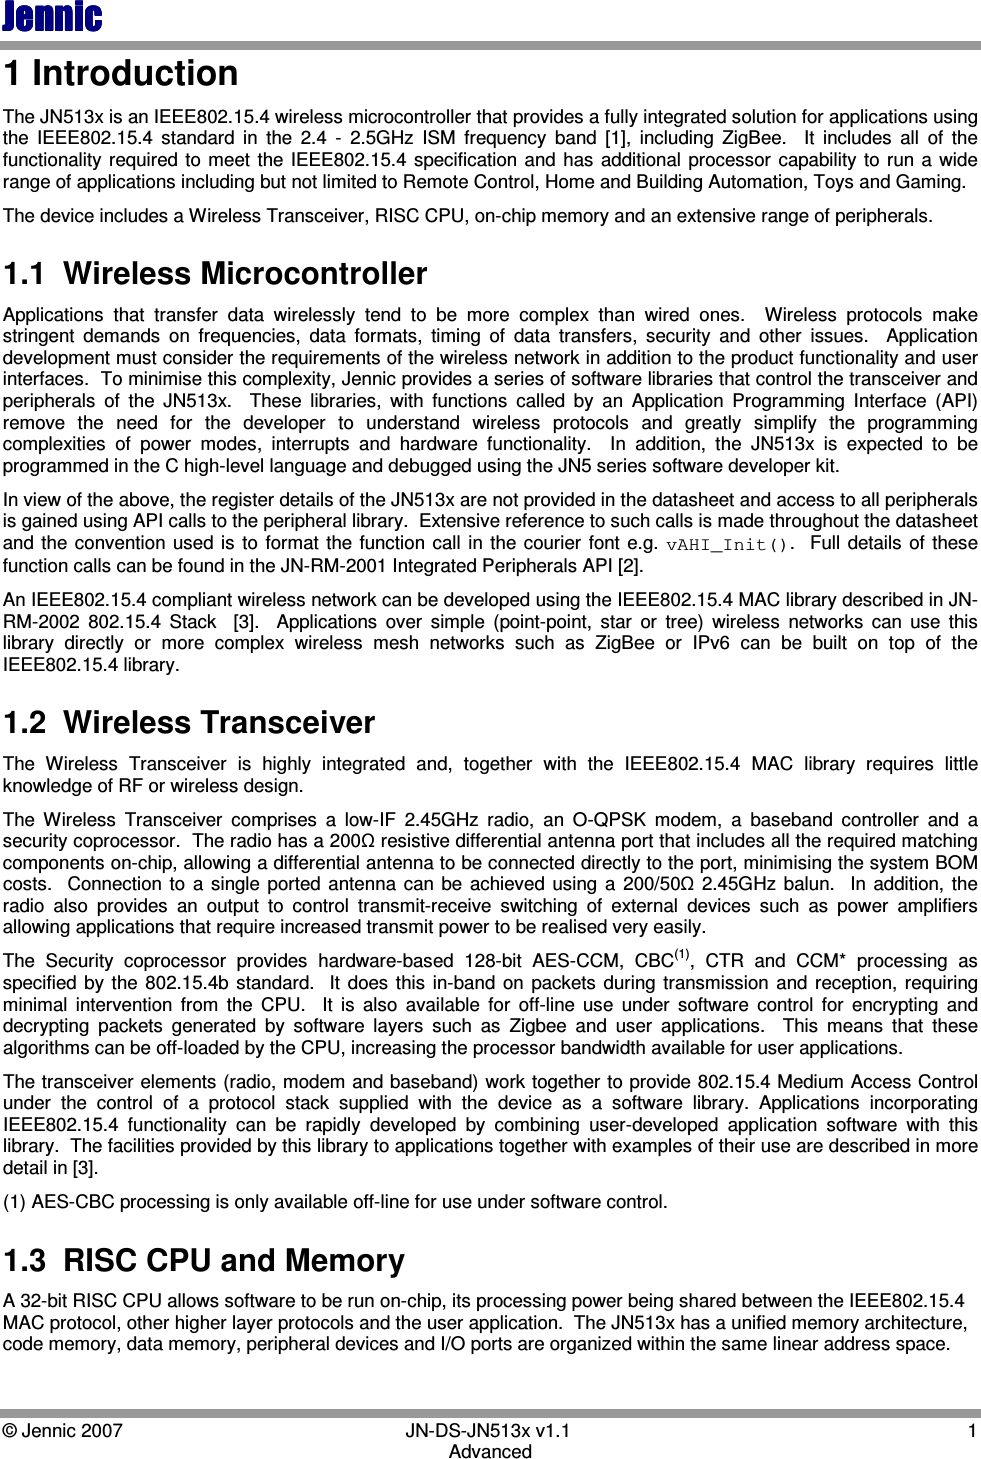 JennicJennicJennicJennic    © Jennic 2007        JN-DS-JN513x v1.1  1 Advanced 1 Introduction The JN513x is an IEEE802.15.4 wireless microcontroller that provides a fully integrated solution for applications using the  IEEE802.15.4  standard  in  the  2.4  -  2.5GHz  ISM  frequency  band  [1],  including  ZigBee.    It  includes  all  of  the functionality required to meet  the IEEE802.15.4  specification and  has  additional  processor  capability to  run a wide range of applications including but not limited to Remote Control, Home and Building Automation, Toys and Gaming.  The device includes a Wireless Transceiver, RISC CPU, on-chip memory and an extensive range of peripherals. 1.1  Wireless Microcontroller Applications  that  transfer  data  wirelessly  tend  to  be  more  complex  than  wired  ones.    Wireless  protocols  make stringent  demands  on  frequencies,  data  formats,  timing  of  data  transfers,  security  and  other  issues.    Application development must consider the requirements of the wireless network in addition to the product functionality and user interfaces.  To minimise this complexity, Jennic provides a series of software libraries that control the transceiver and peripherals  of  the  JN513x.    These  libraries,  with  functions  called  by  an  Application  Programming  Interface  (API) remove  the  need  for  the  developer  to  understand  wireless  protocols  and  greatly  simplify  the  programming complexities  of  power  modes,  interrupts  and  hardware  functionality.    In  addition,  the  JN513x  is  expected  to  be programmed in the C high-level language and debugged using the JN5 series software developer kit. In view of the above, the register details of the JN513x are not provided in the datasheet and access to all peripherals is gained using API calls to the peripheral library.  Extensive reference to such calls is made throughout the datasheet and the  convention used  is  to  format  the function  call  in  the  courier  font e.g.  vAHI_Init().    Full  details  of  these function calls can be found in the JN-RM-2001 Integrated Peripherals API [2]. An IEEE802.15.4 compliant wireless network can be developed using the IEEE802.15.4 MAC library described in JN-RM-2002  802.15.4  Stack    [3].    Applications  over  simple  (point-point,  star  or  tree)  wireless  networks  can  use  this library  directly  or  more  complex  wireless  mesh  networks  such  as  ZigBee  or  IPv6  can  be  built  on  top  of  the IEEE802.15.4 library. 1.2  Wireless Transceiver  The  Wireless  Transceiver  is  highly  integrated  and,  together  with  the  IEEE802.15.4  MAC  library  requires  little knowledge of RF or wireless design. The  Wireless  Transceiver  comprises  a  low-IF  2.45GHz  radio,  an  O-QPSK  modem,  a  baseband  controller  and  a security coprocessor.  The radio has a 200Ω resistive differential antenna port that includes all the required matching components on-chip, allowing a differential antenna to be connected directly to the port, minimising the system BOM costs.    Connection to  a  single  ported antenna  can  be  achieved  using  a  200/50Ω  2.45GHz  balun.    In  addition,  the radio  also  provides  an  output  to  control  transmit-receive  switching  of  external  devices  such  as  power  amplifiers allowing applications that require increased transmit power to be realised very easily. The  Security  coprocessor  provides  hardware-based  128-bit  AES-CCM,  CBC(1),  CTR  and  CCM*  processing  as specified  by  the  802.15.4b  standard.    It  does  this  in-band  on  packets  during  transmission and  reception, requiring minimal  intervention  from  the  CPU.    It  is  also  available  for  off-line  use  under  software  control  for  encrypting  and decrypting  packets  generated  by  software  layers  such  as  Zigbee  and  user  applications.    This  means  that  these algorithms can be off-loaded by the CPU, increasing the processor bandwidth available for user applications. The transceiver elements (radio, modem and baseband) work together to provide 802.15.4 Medium Access Control under  the  control  of  a  protocol  stack  supplied  with  the  device  as  a  software  library.  Applications  incorporating IEEE802.15.4  functionality  can  be  rapidly  developed  by  combining  user-developed  application  software  with  this library.  The facilities provided by this library to applications together with examples of their use are described in more detail in [3]. (1) AES-CBC processing is only available off-line for use under software control. 1.3  RISC CPU and Memory A 32-bit RISC CPU allows software to be run on-chip, its processing power being shared between the IEEE802.15.4 MAC protocol, other higher layer protocols and the user application.  The JN513x has a unified memory architecture, code memory, data memory, peripheral devices and I/O ports are organized within the same linear address space.  